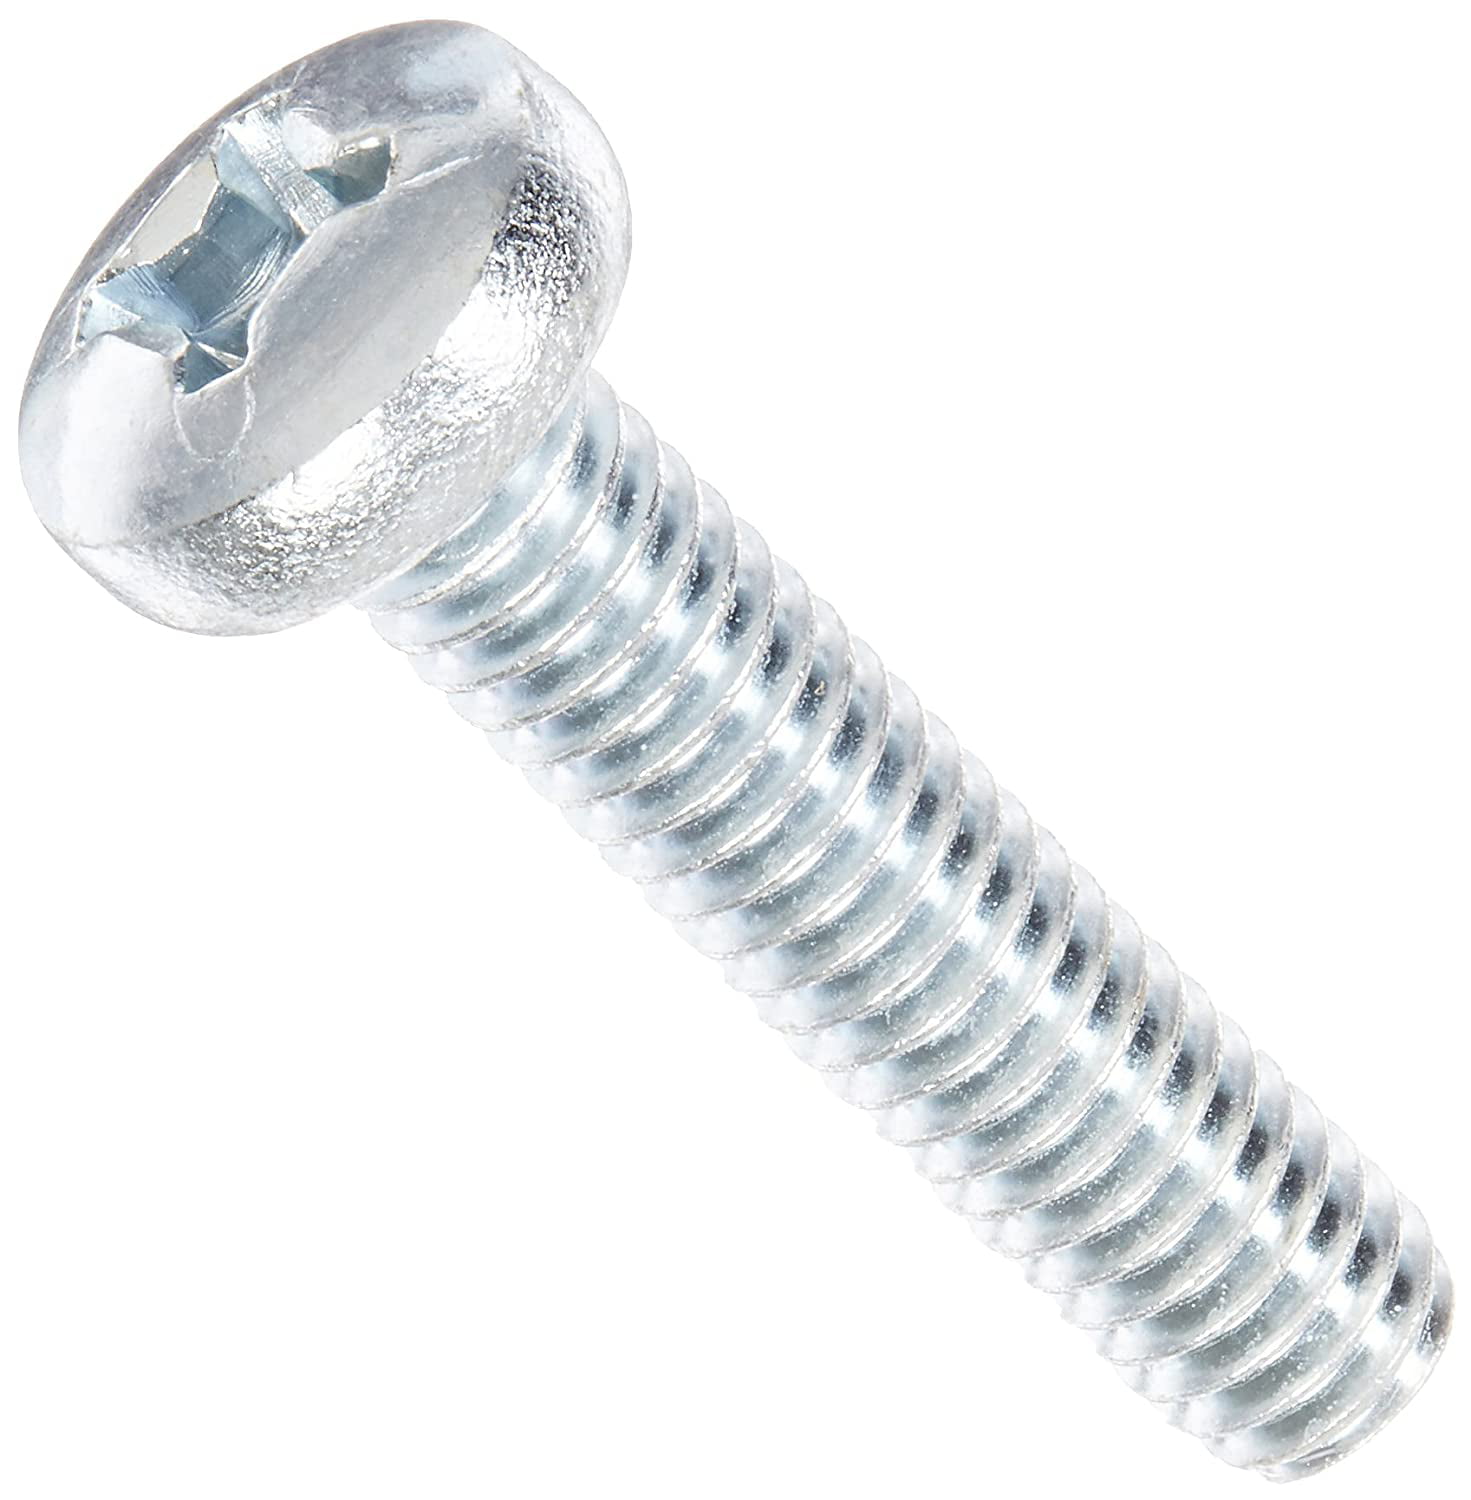 #10-24 Thread Size Meets ASME B18.6.3 Zinc Plated #2 Phillips Drive Steel Pan Head Machine Screw 5 Length Pack of 10 Fully Threaded Imported 